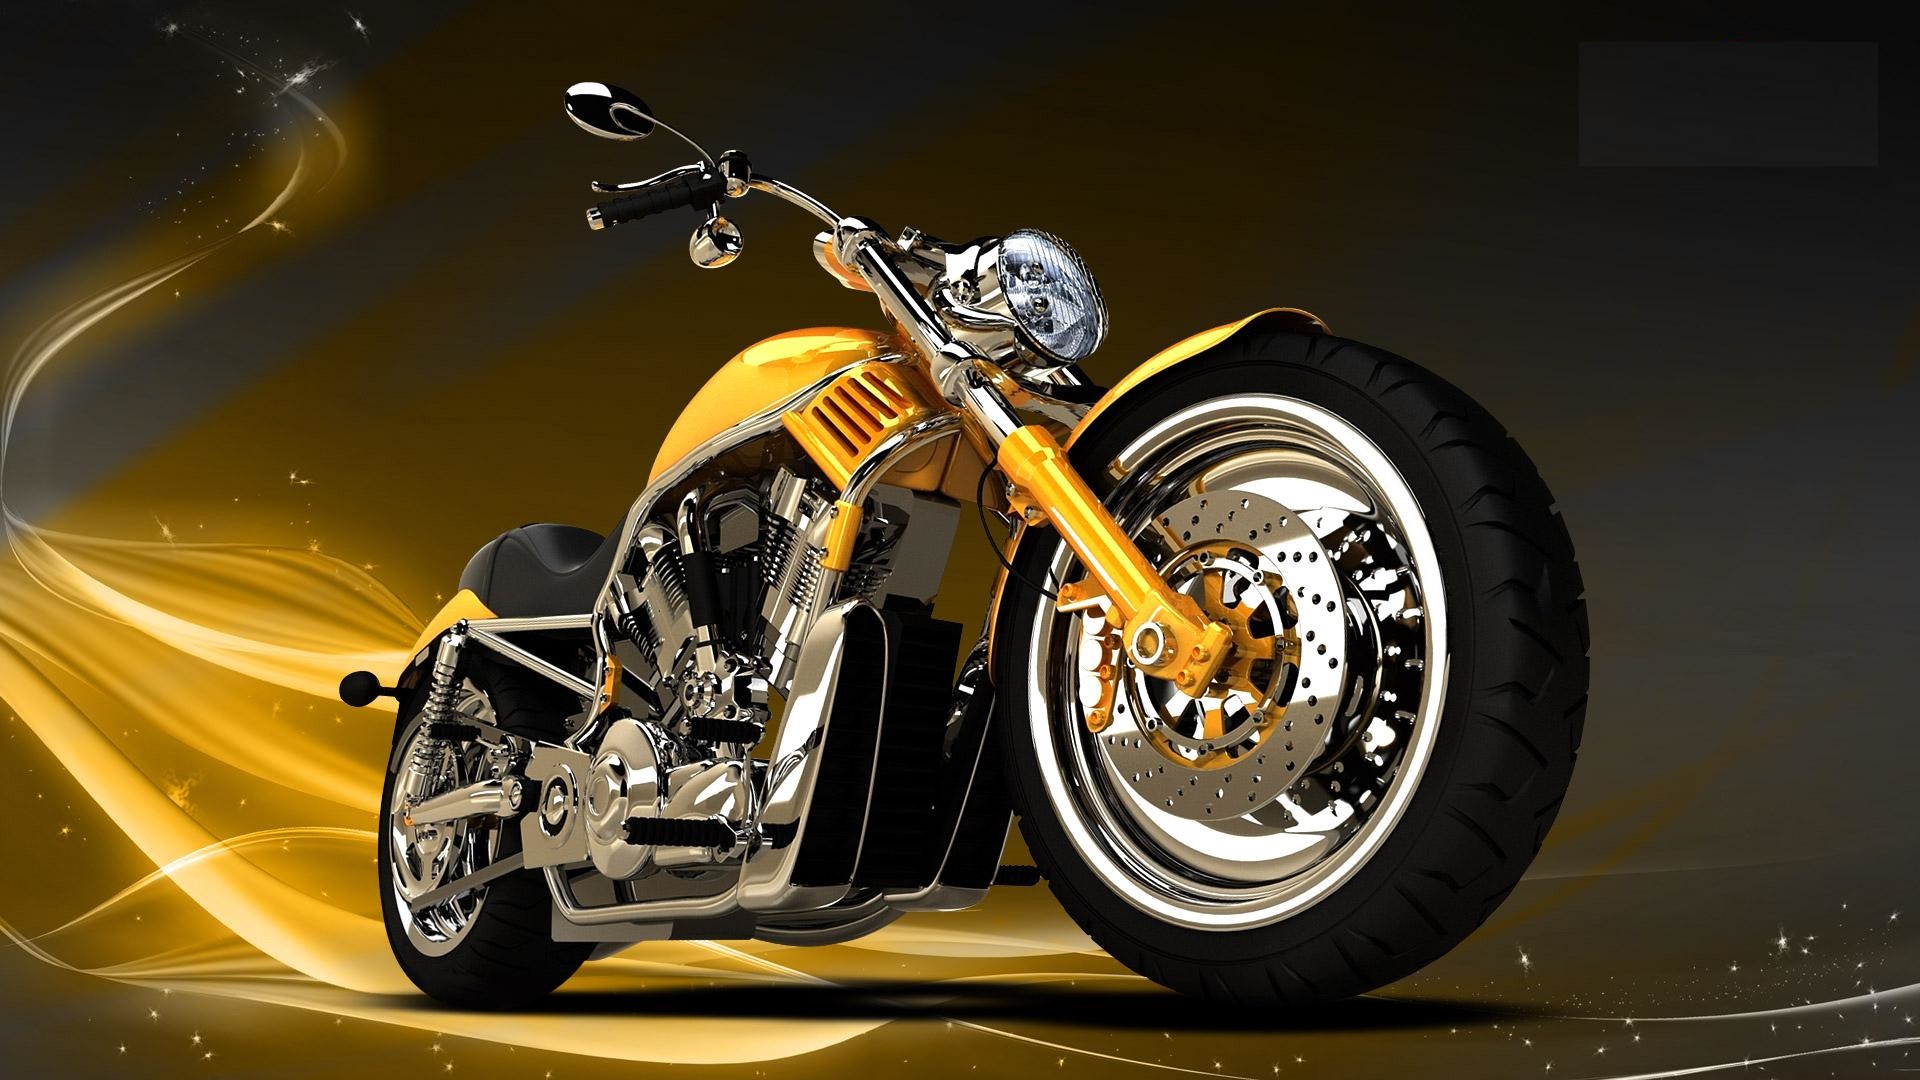 Yellow Bike 1920x1080 HD Wallpapers 2013 - 9to5 Car Wallpapers